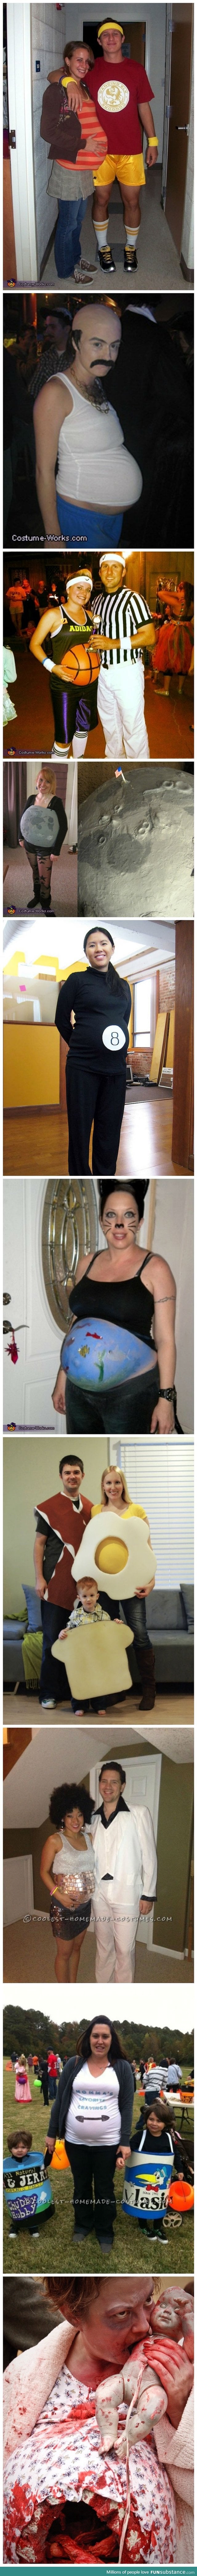 Decorate that baby bump with these Halloween costumes.